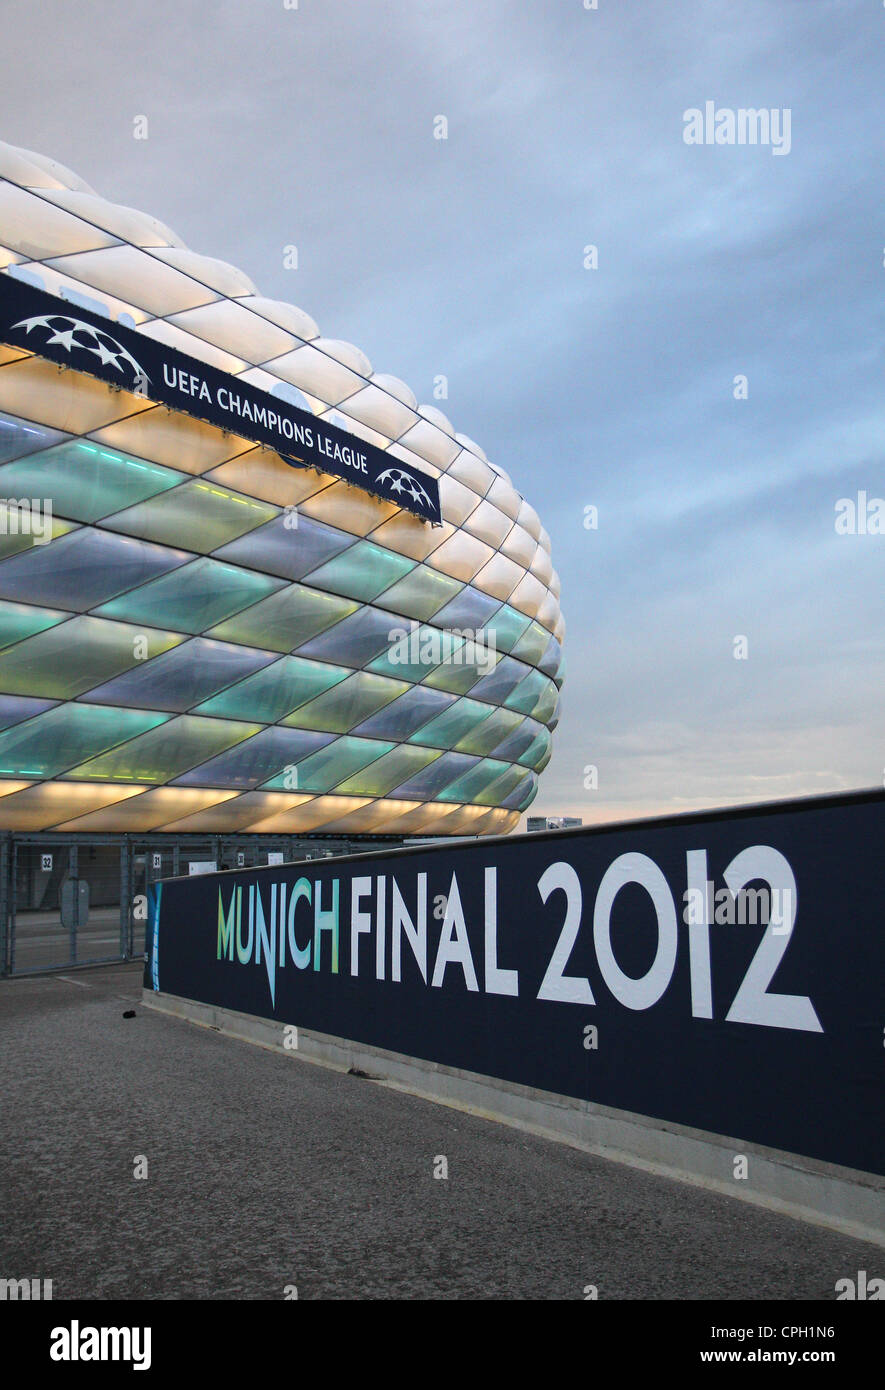 The Allianz Arena pictured during the UEFA Champions League Final 2012 Bayern Munich v Chelsea Stock Photo